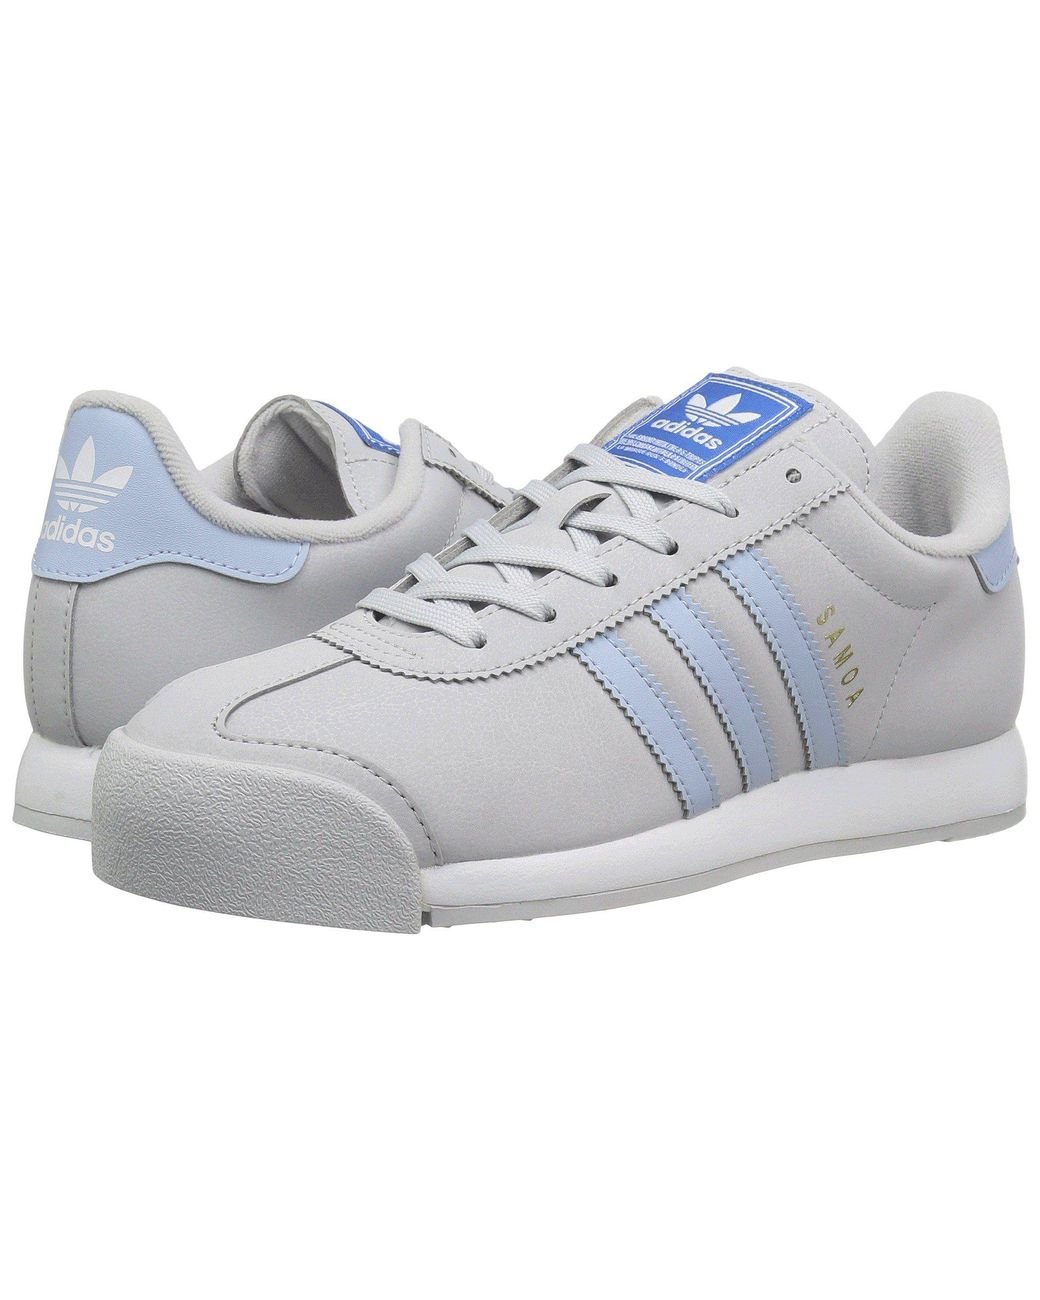 adidas Samoa (light Grey Heather Solid Grey/easy Blue/footwear White) Women's Classic Shoes in Gray | Lyst